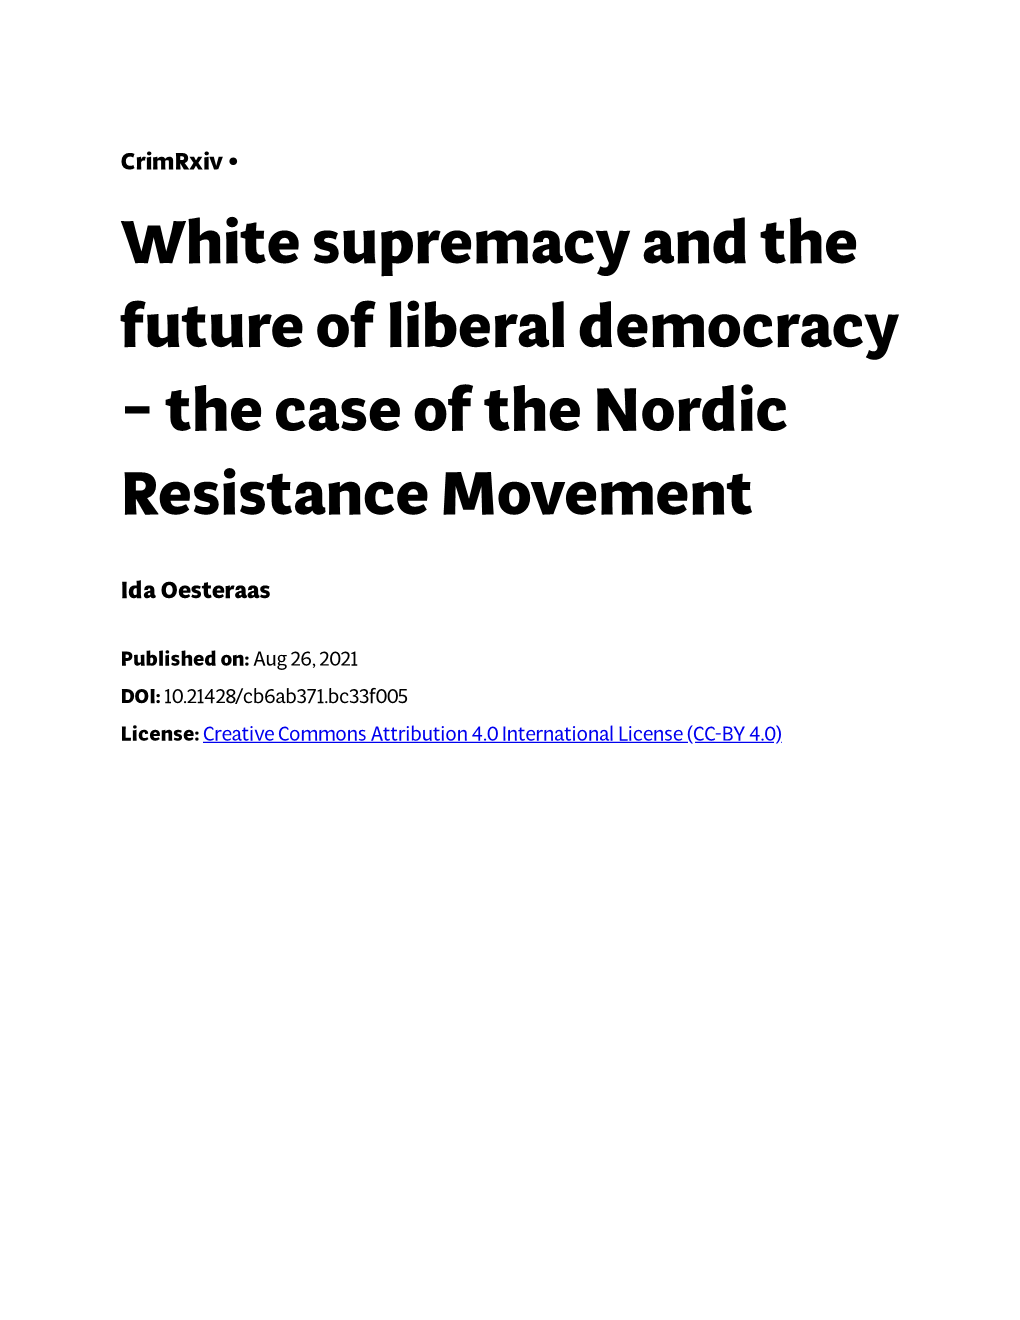 White Supremacy and the Future of Liberal Democracy the Case of the Nordic Resistance Movement